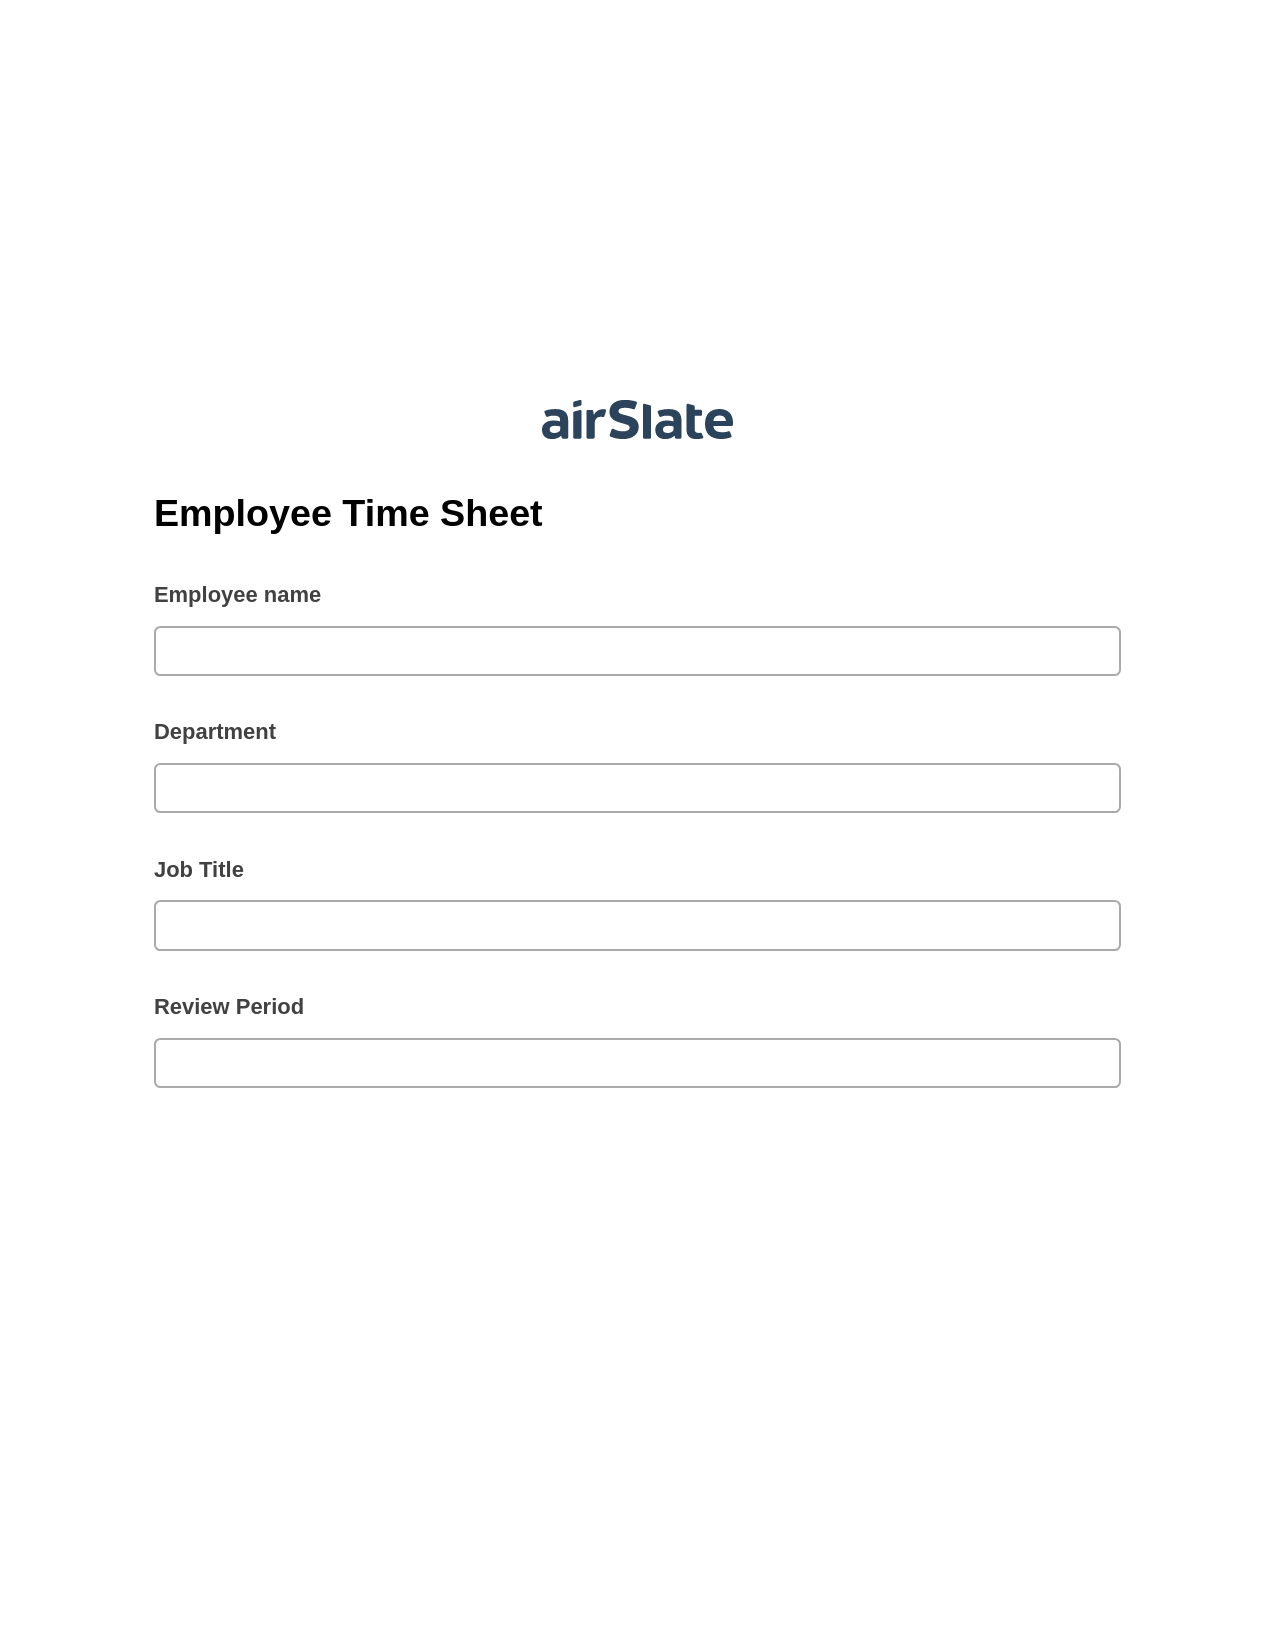 Multirole Employee Time Sheet Pre-fill from another Slate Bot, Create Salesforce Records Bot, Email Notification Postfinish Bot